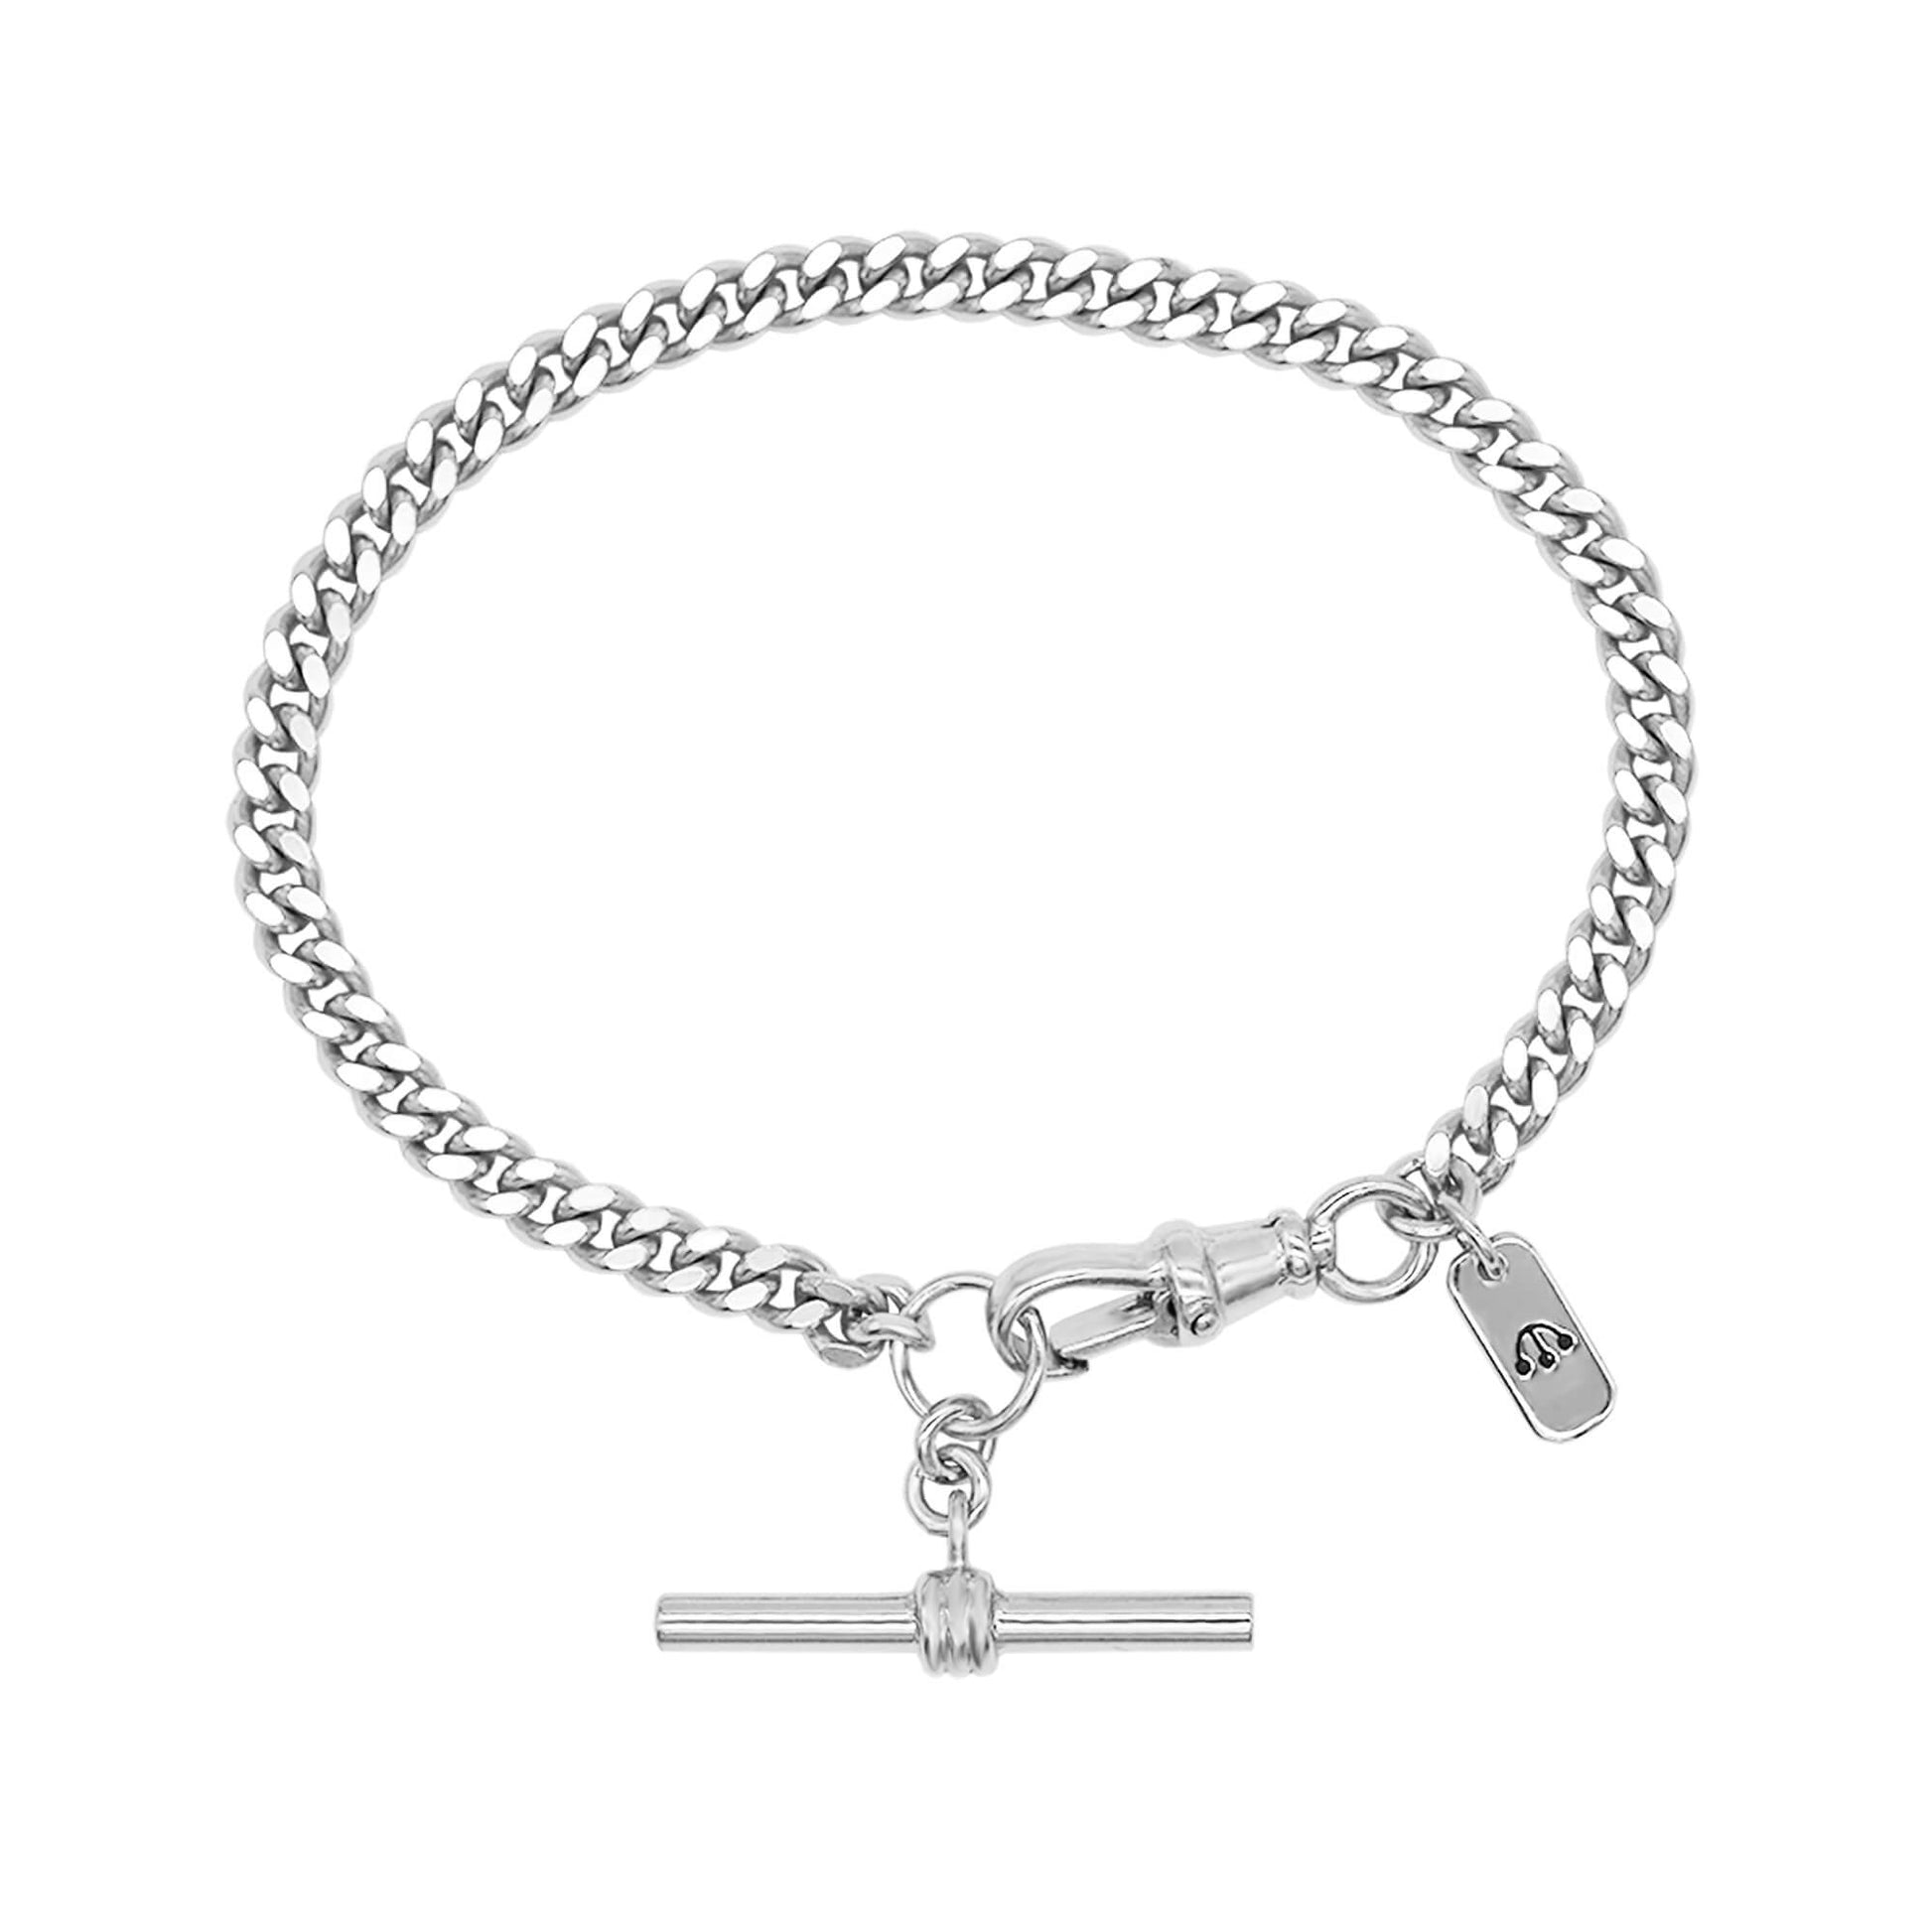 Silver curb chain bracelet with T Bar charm and tag with Pawnshop logo.